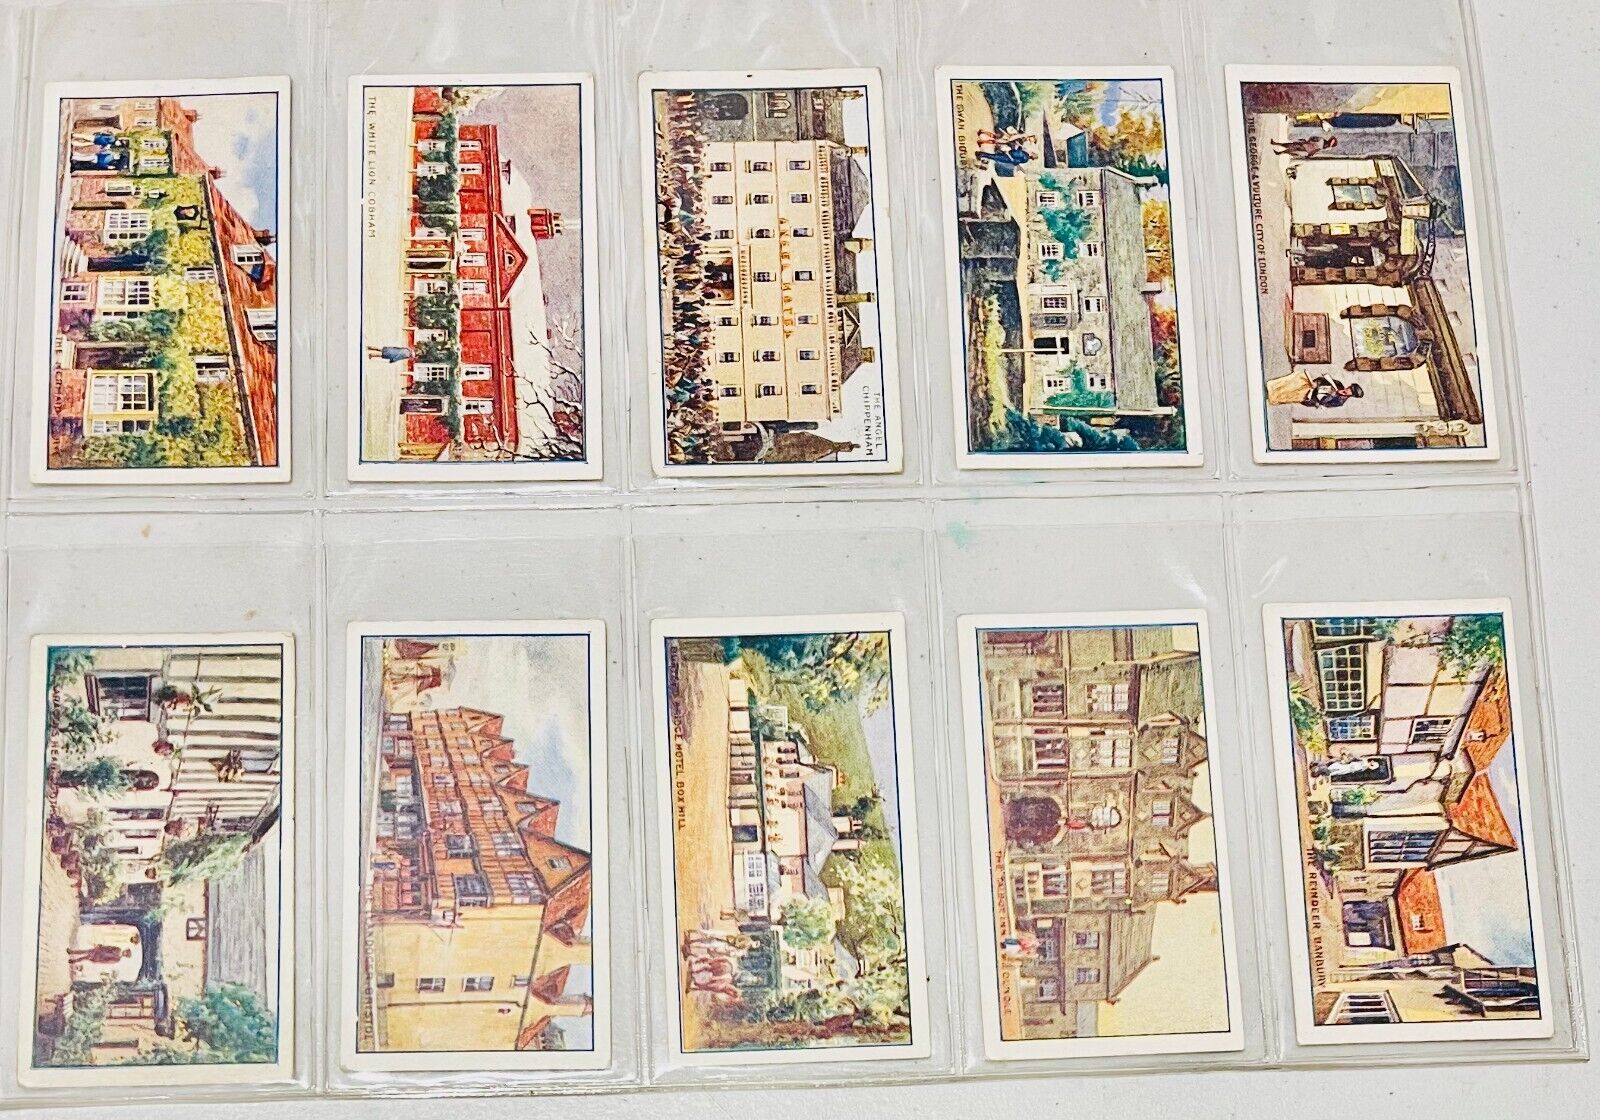 BRITISH ARCHITECTURE: 1924 Complete Set of 50 ENGLISH INNS Cards